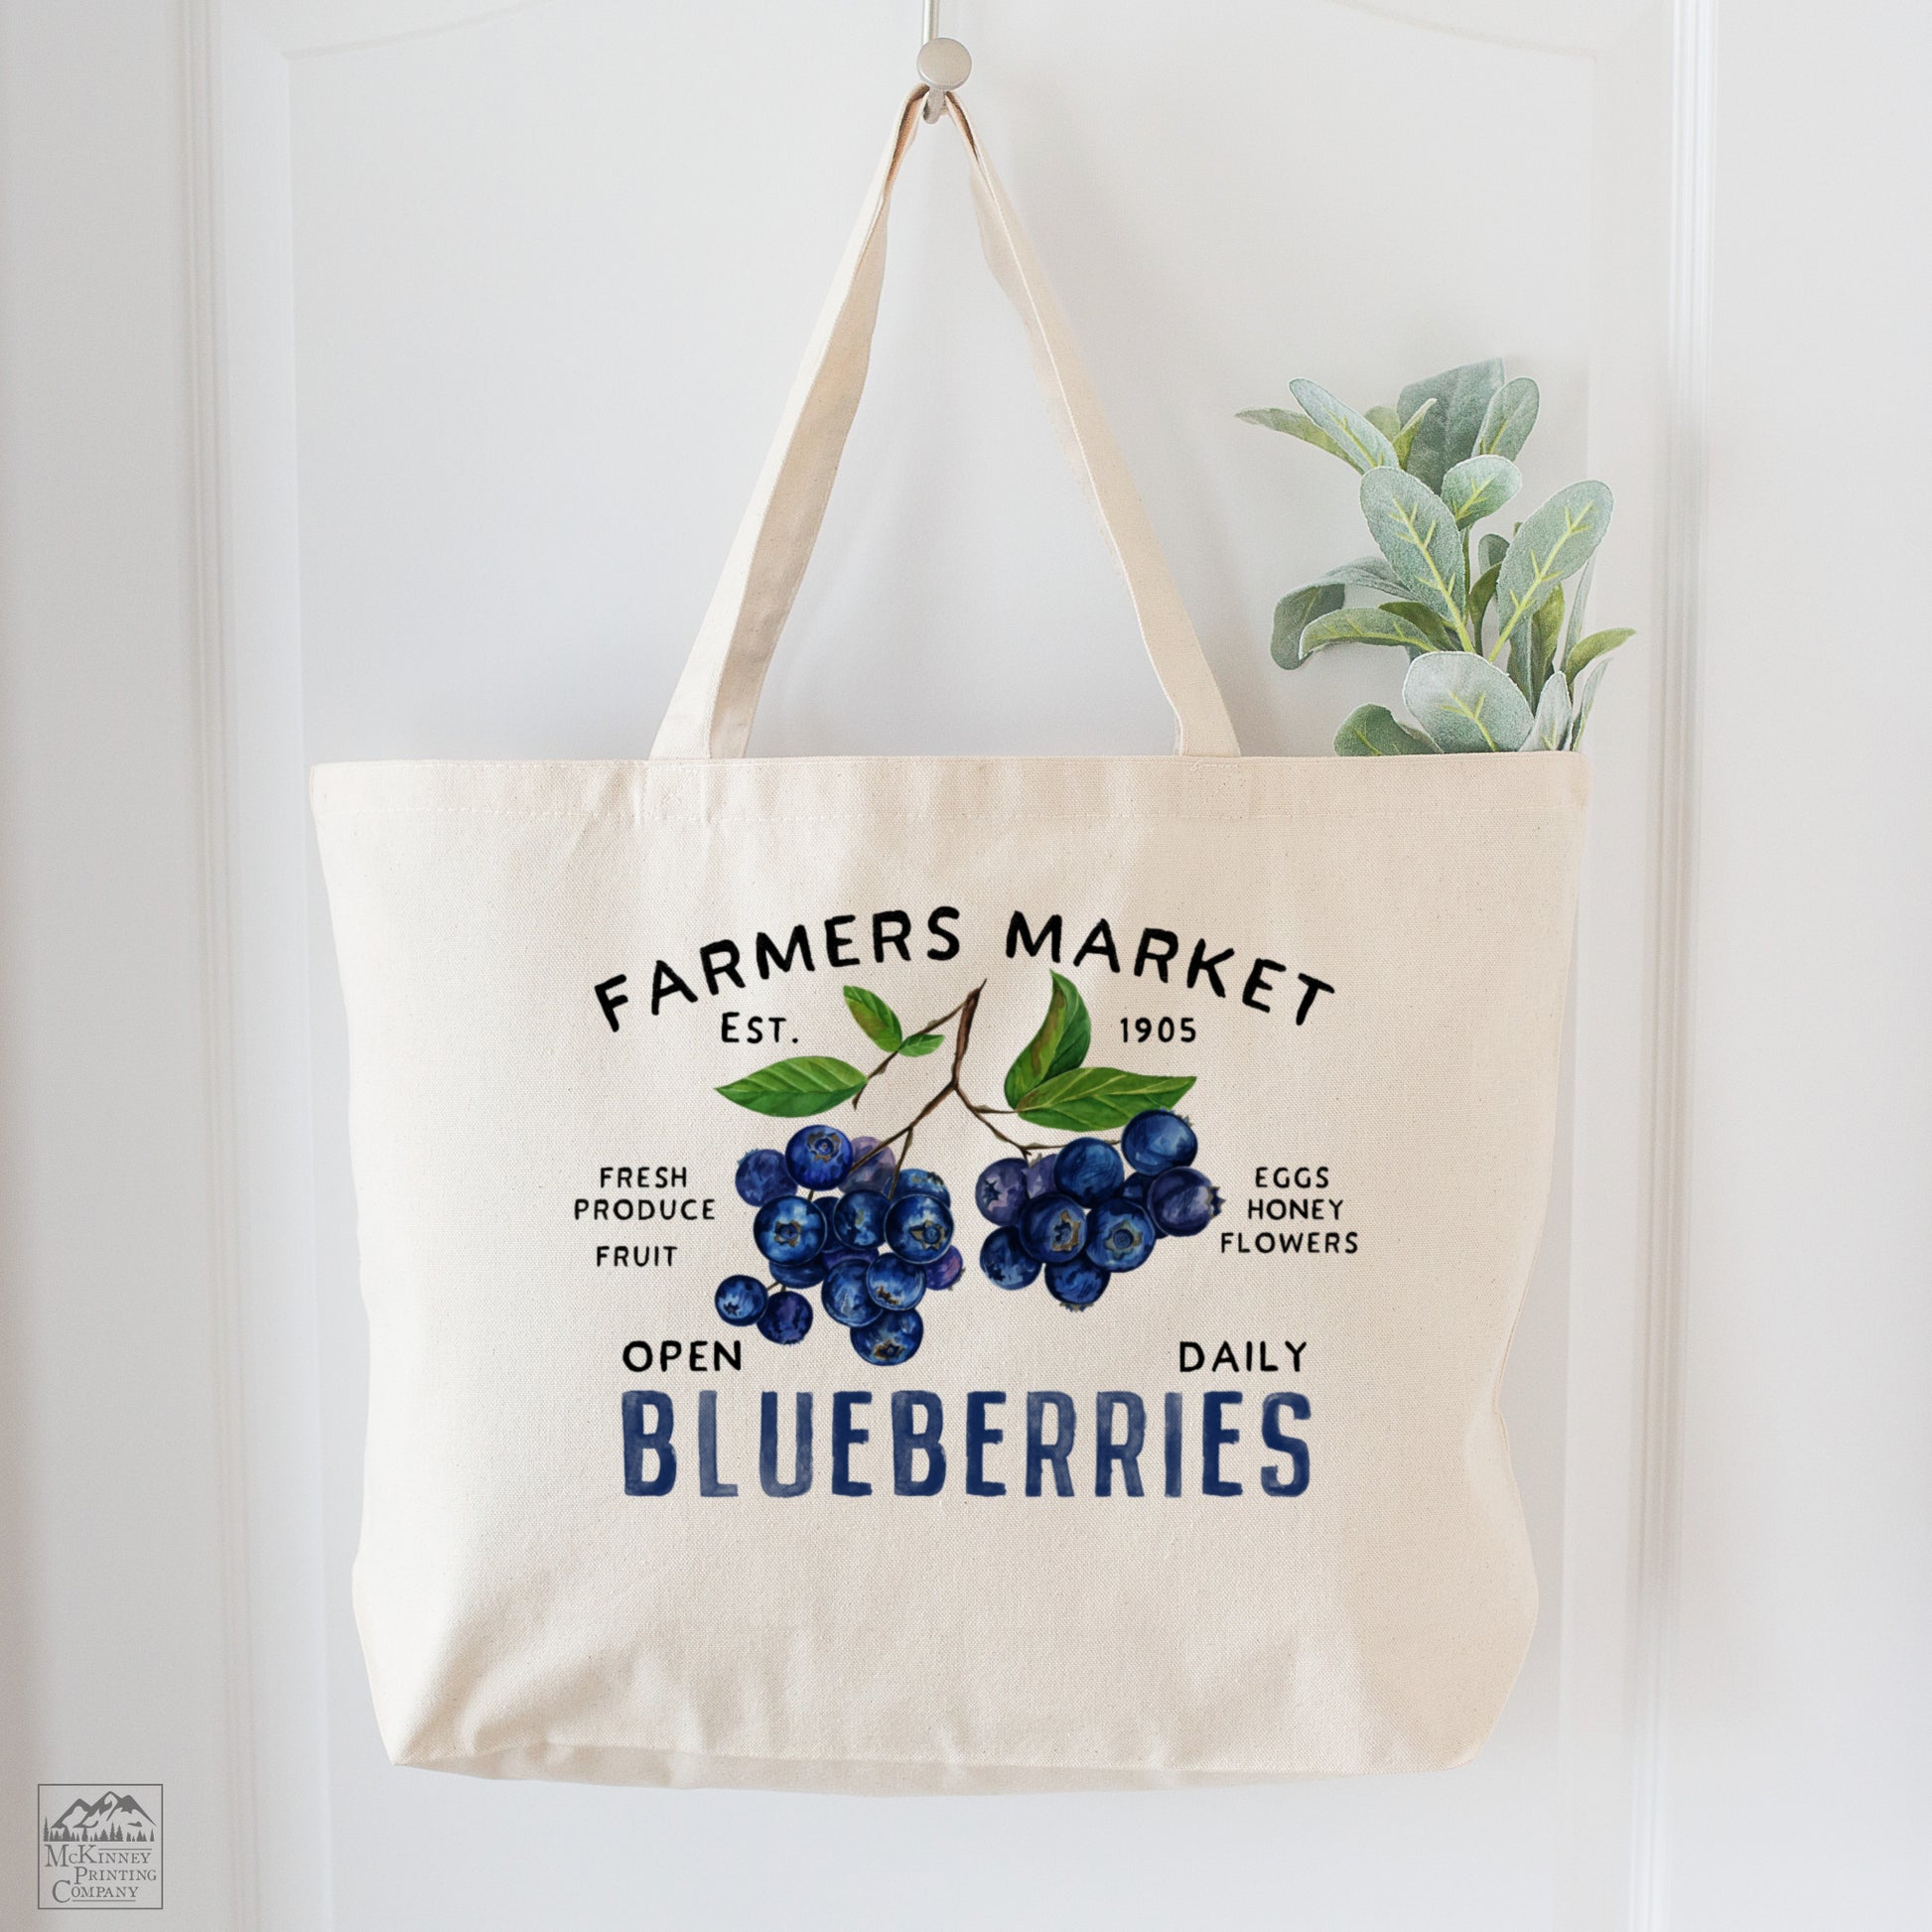 Blueberry Tote Bag, Blueberry Gift, Everyday Tote Bag with Zipper, Farmers Market